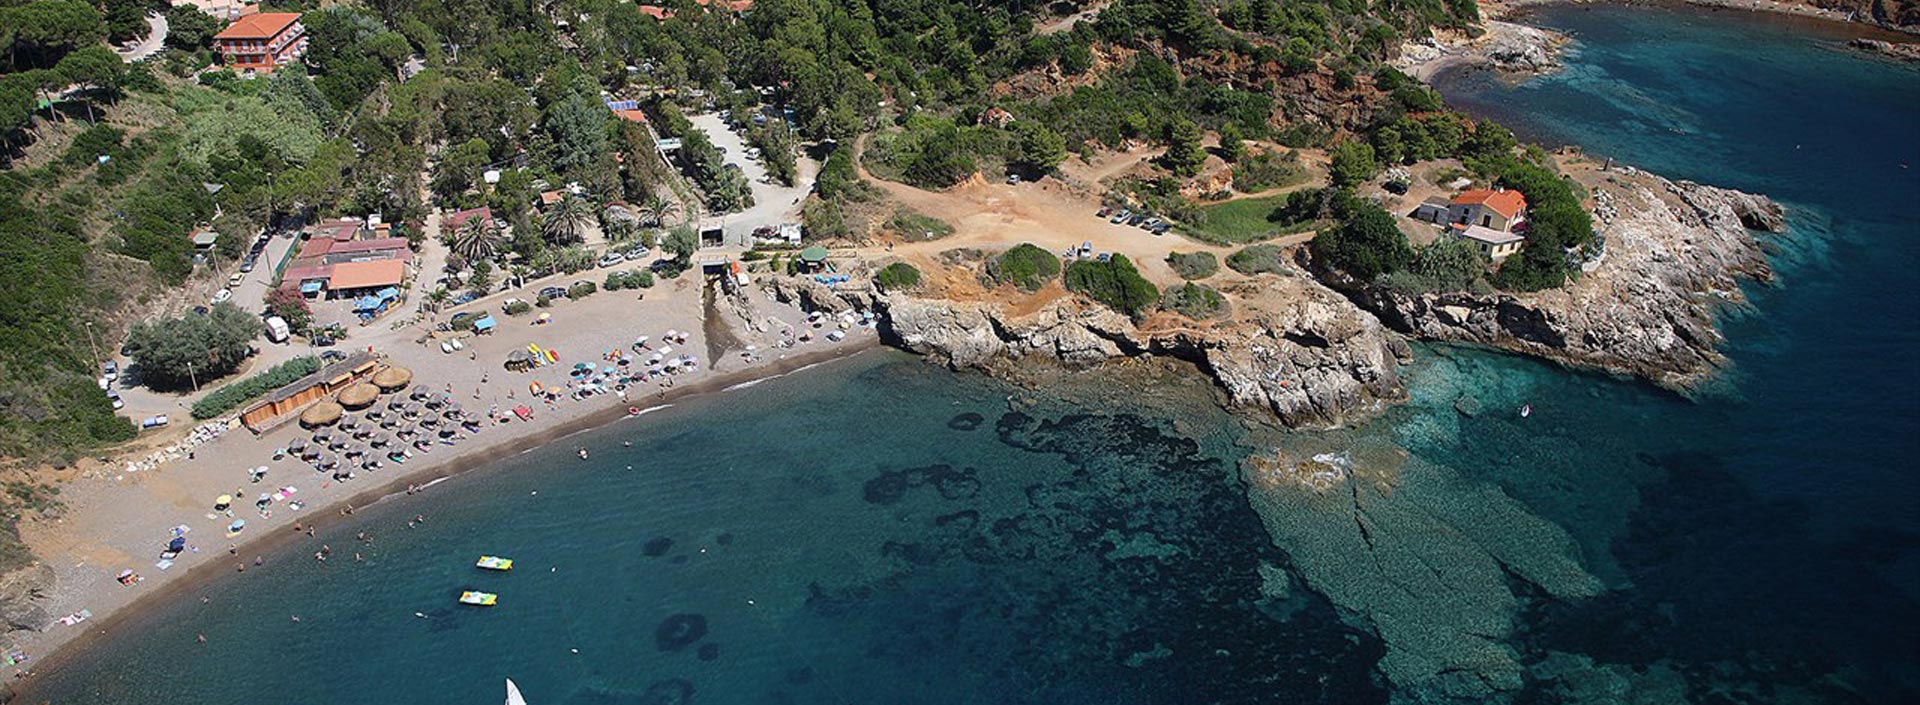 Camping Reale all'Isola d'Elba